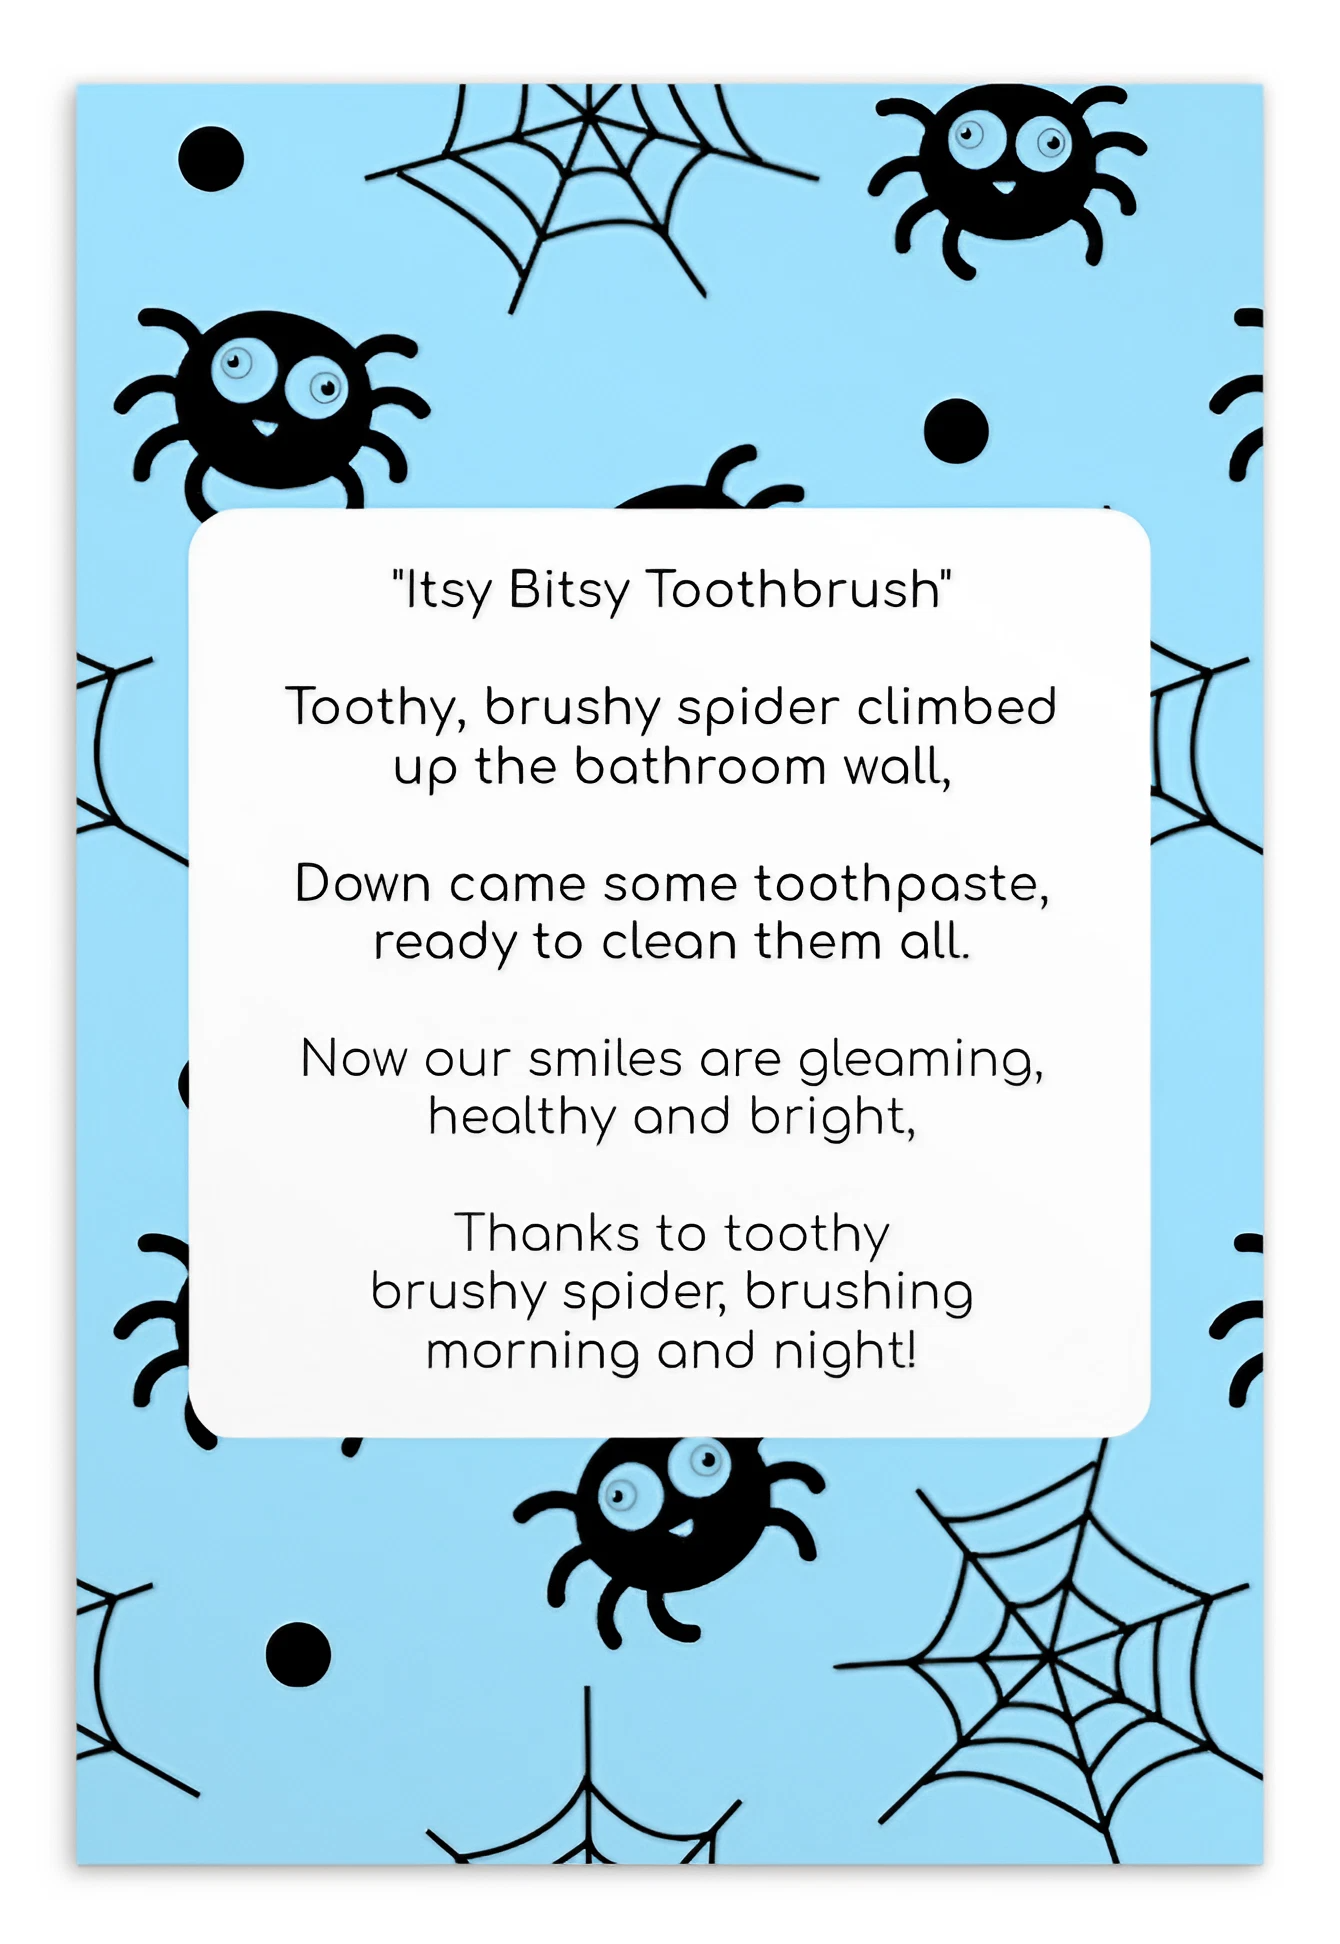 Toothbrushing Song Cards- Itsy Bitsy Toothbrush (To The Tune Of "Itsy Bitsy Spider" Song)